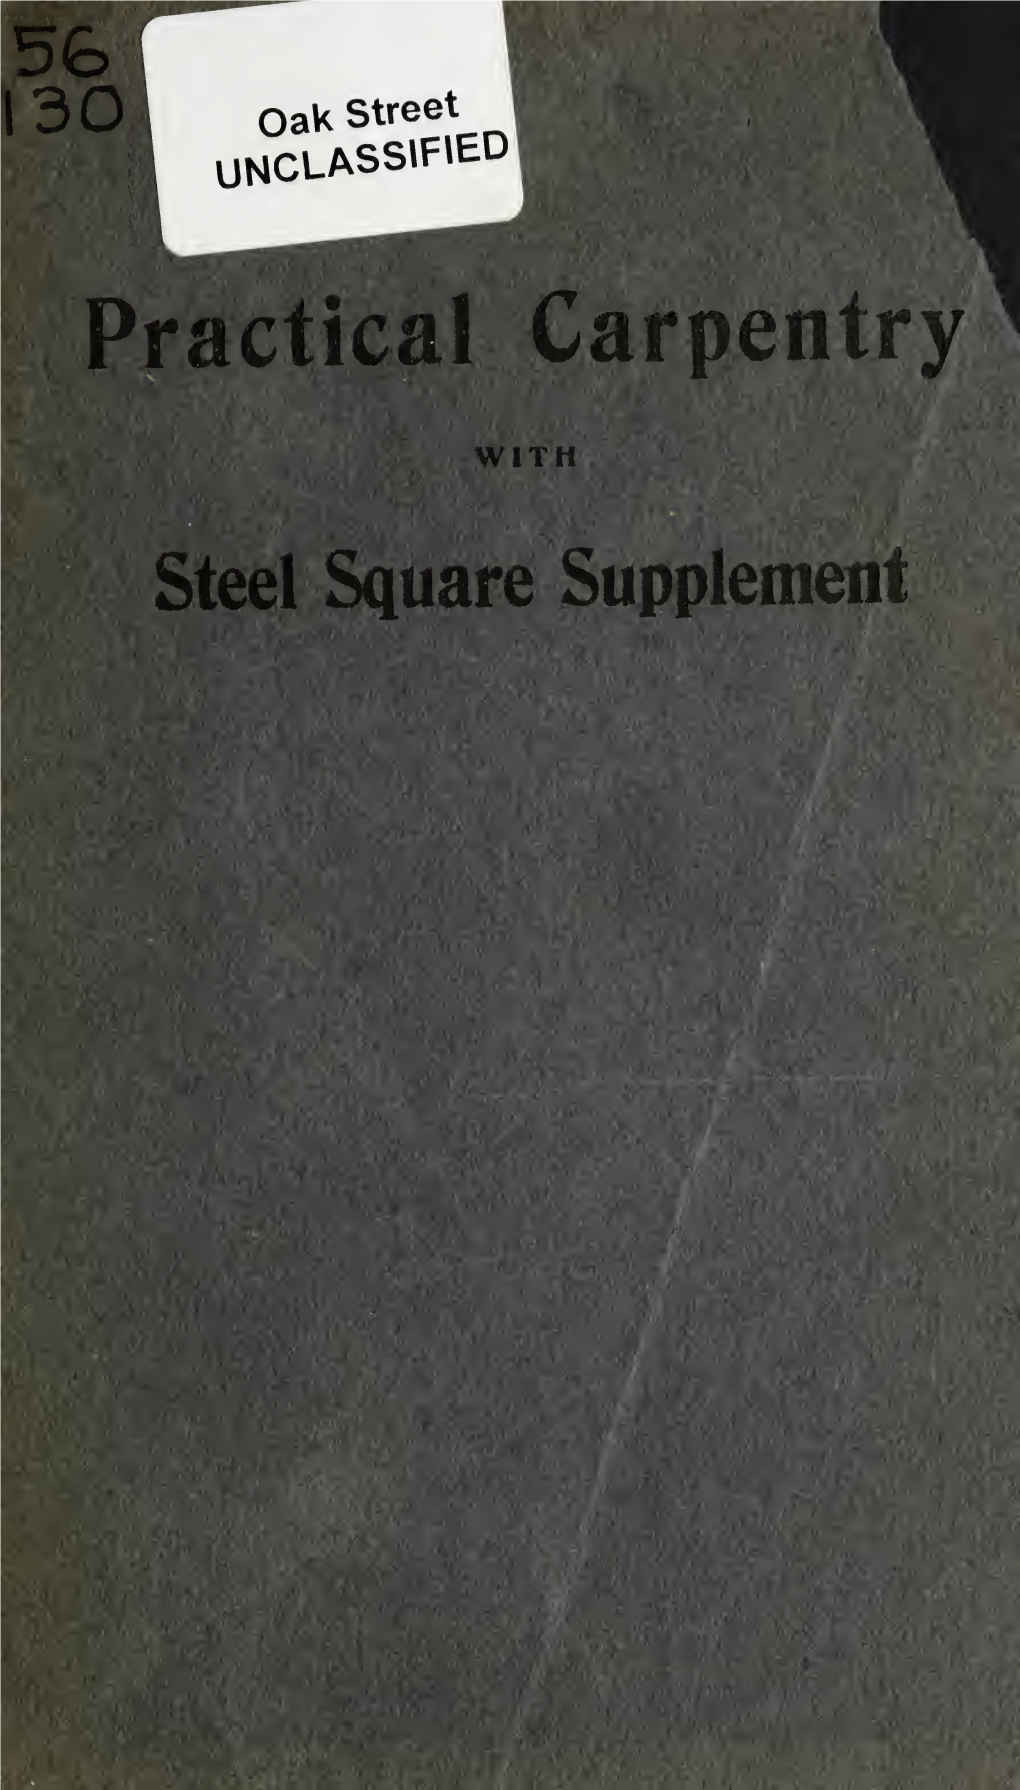 Practical Carpentry with Steel Square Supplement